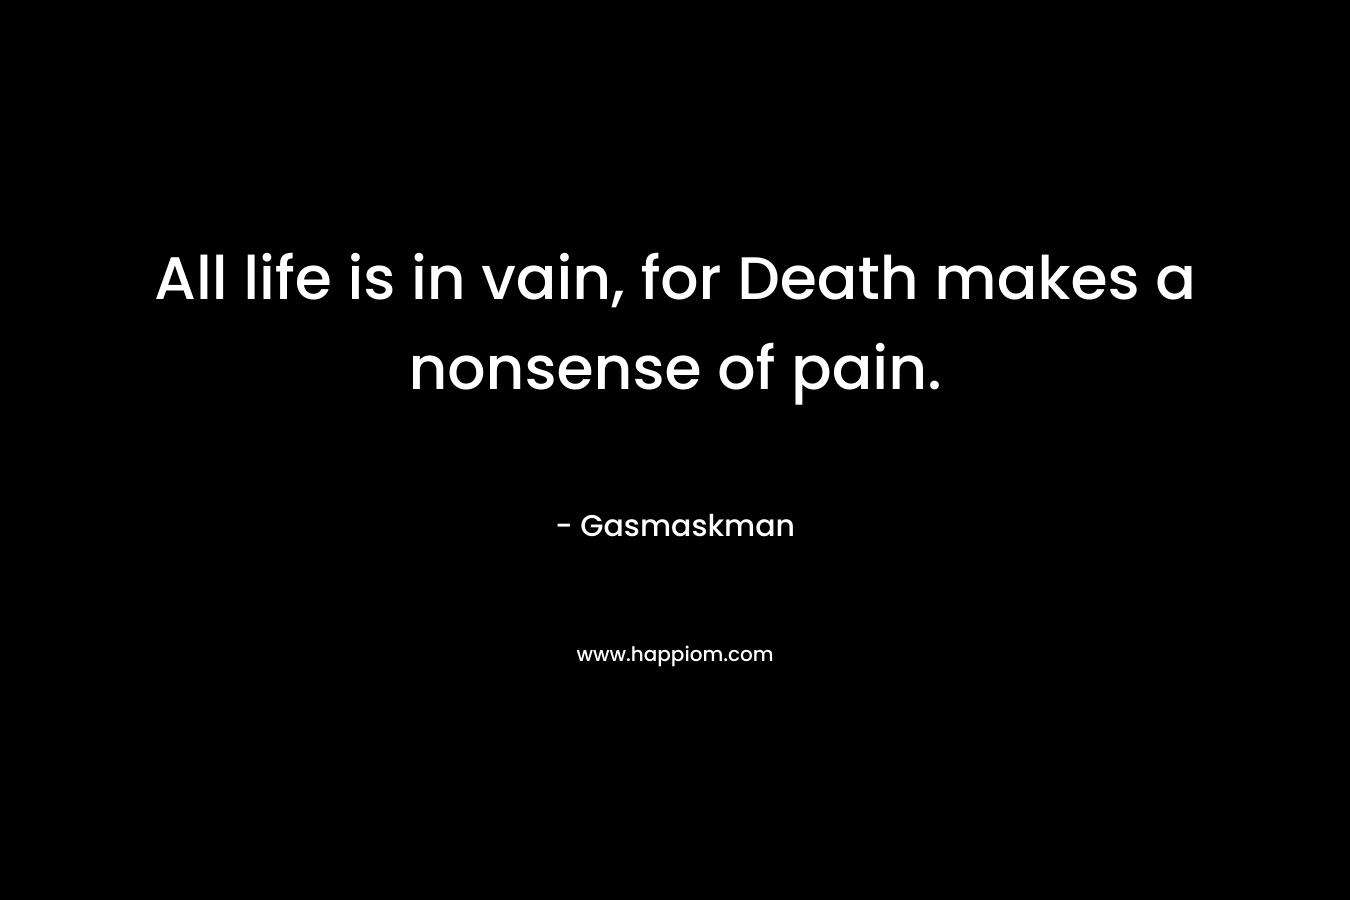 All life is in vain, for Death makes a nonsense of pain.